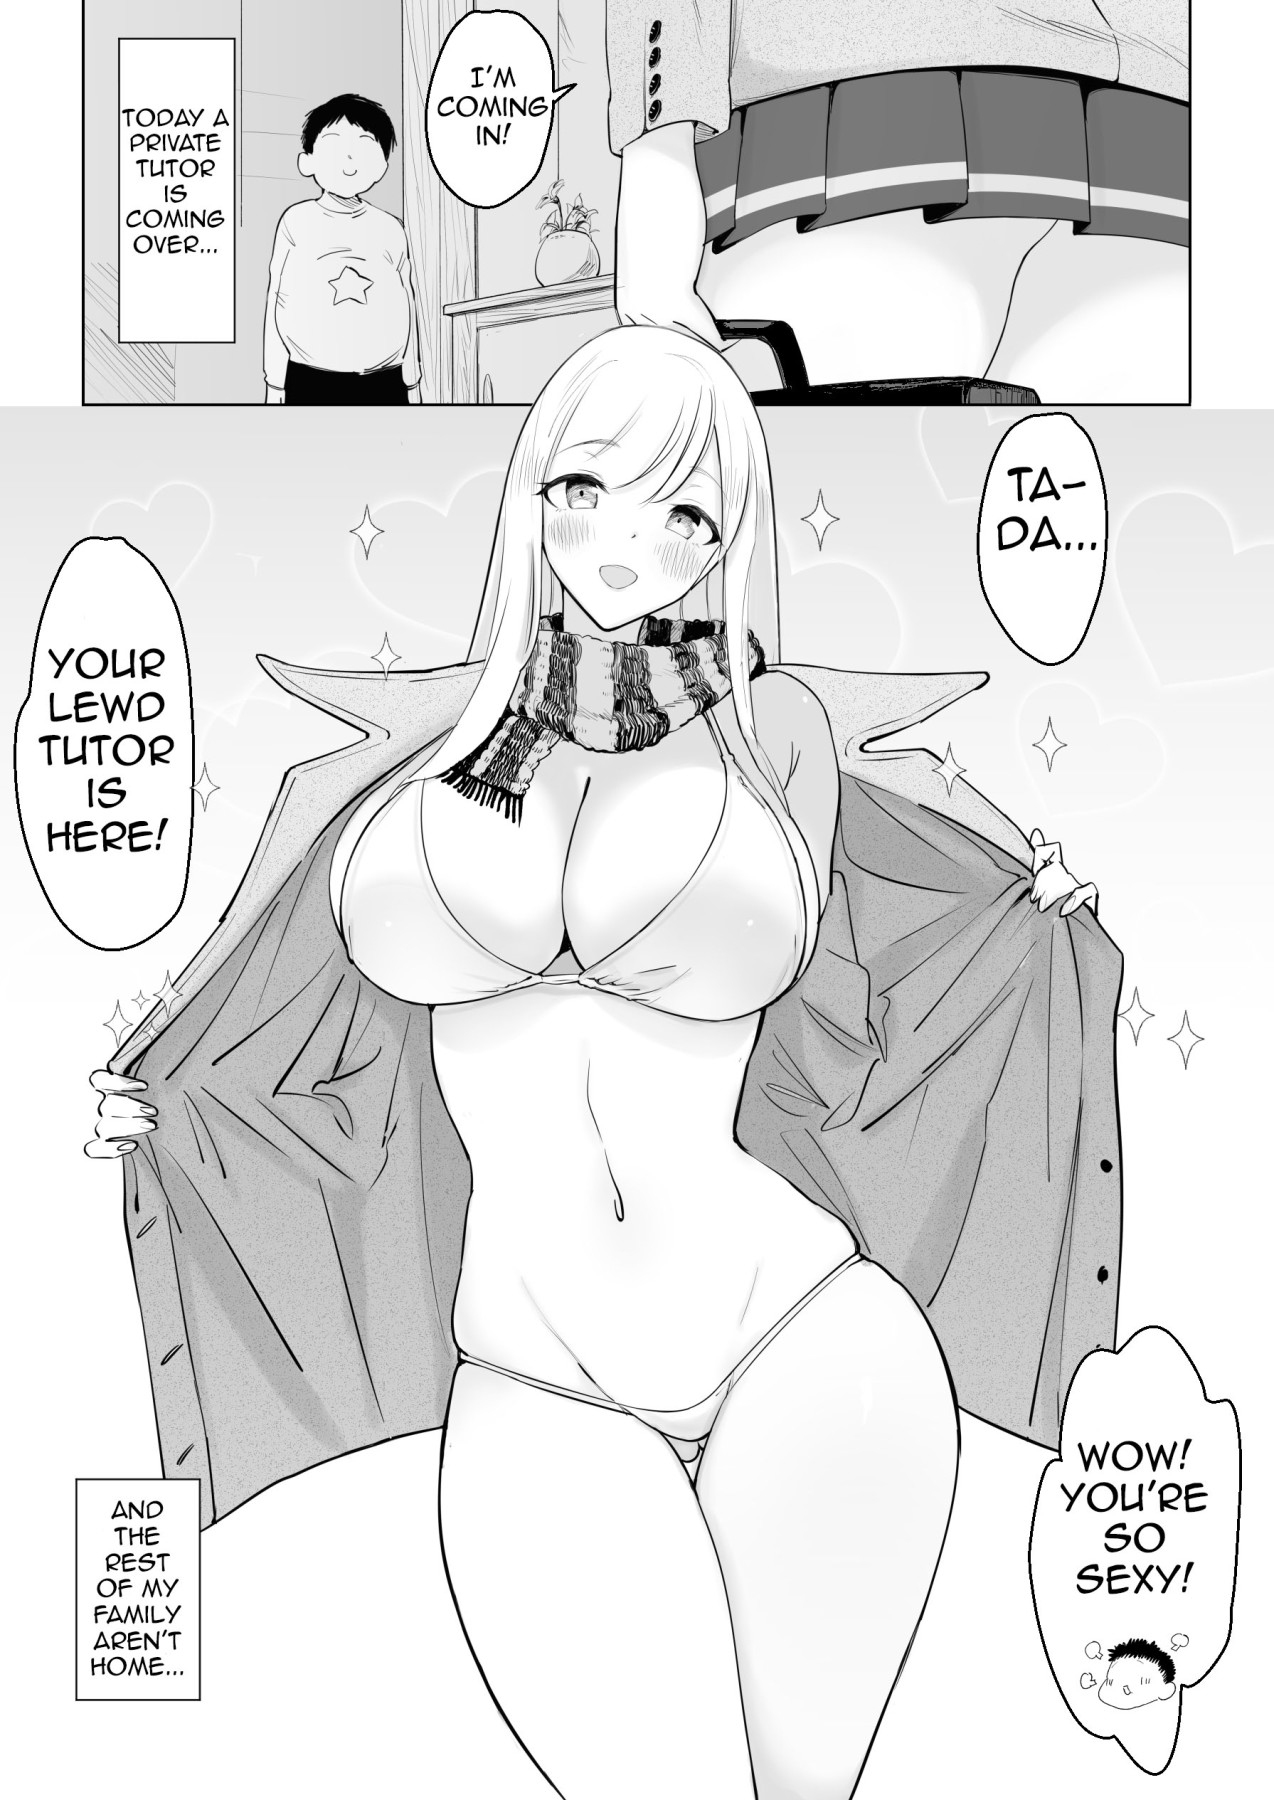 Hentai Manga Comic-This Winter I'm Getting Warm And Lewd Under The Futon With With My Private Tutor-Read-2